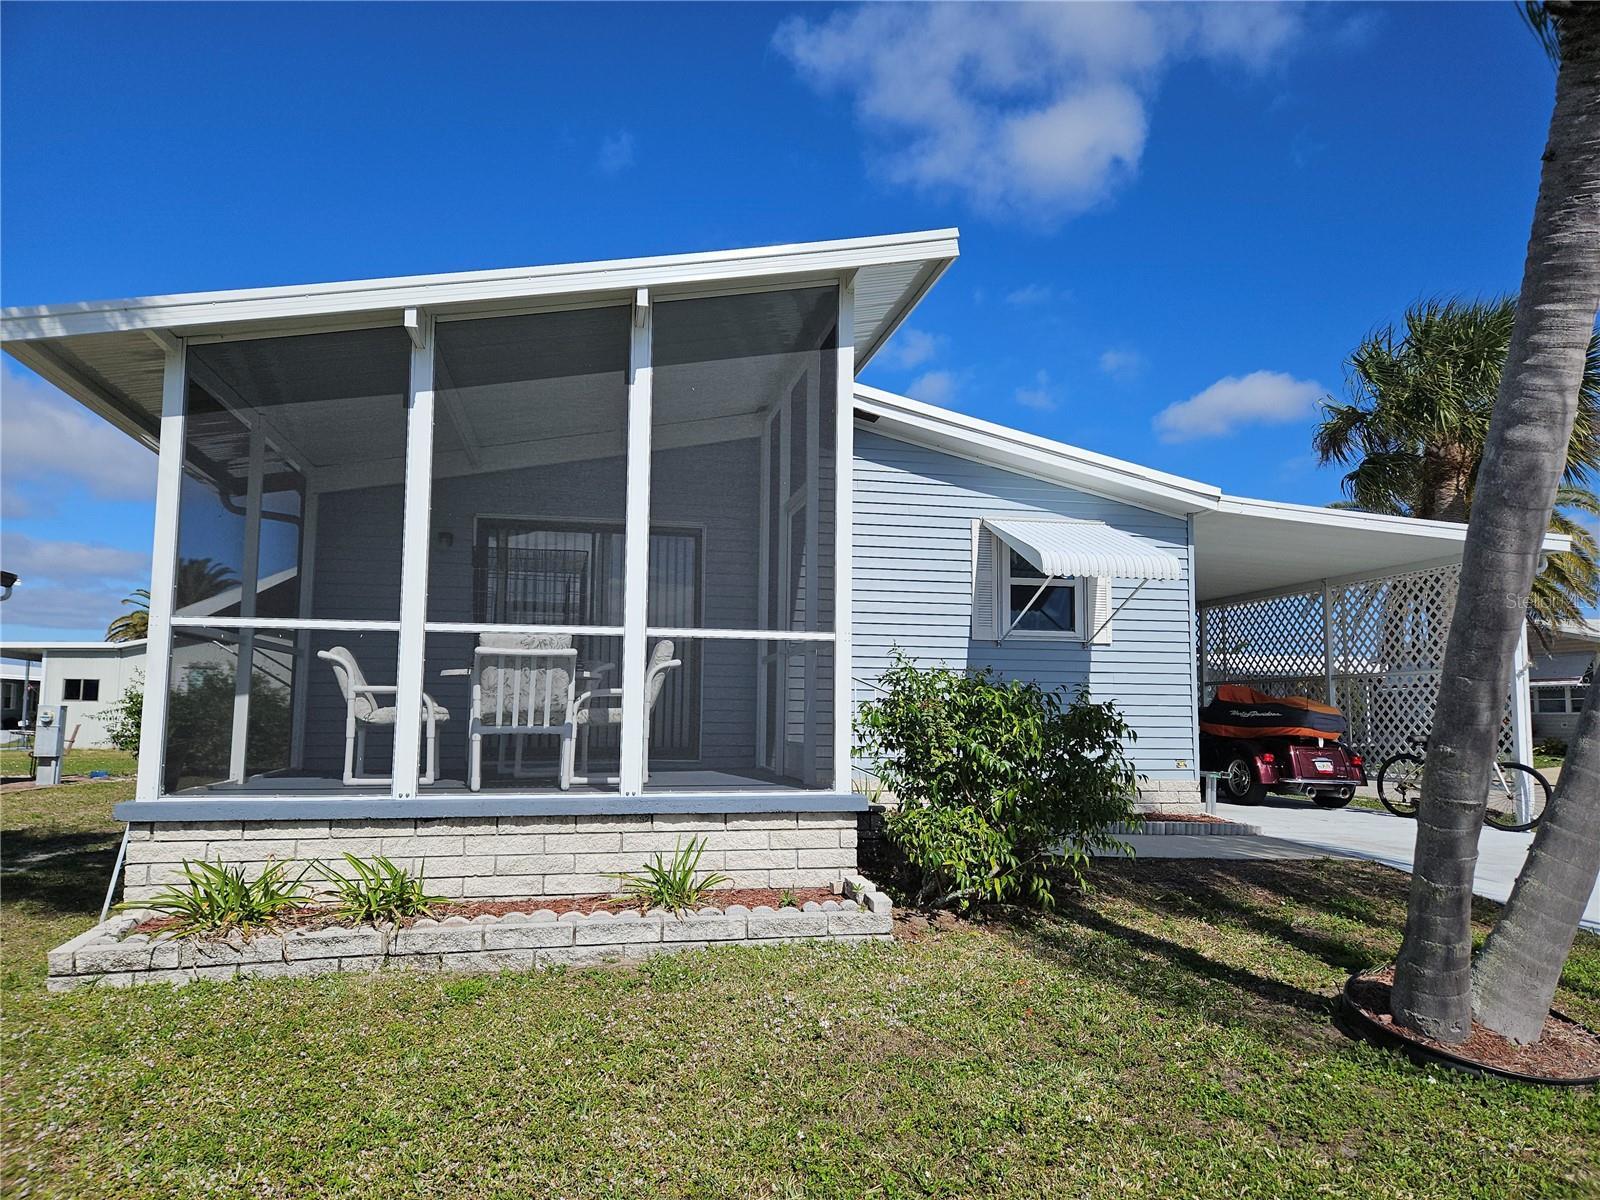 729 RIVERVIEW, NORTH PORT, Manufactured Home - Post 1977,  for sale, The Mount Dora Group 